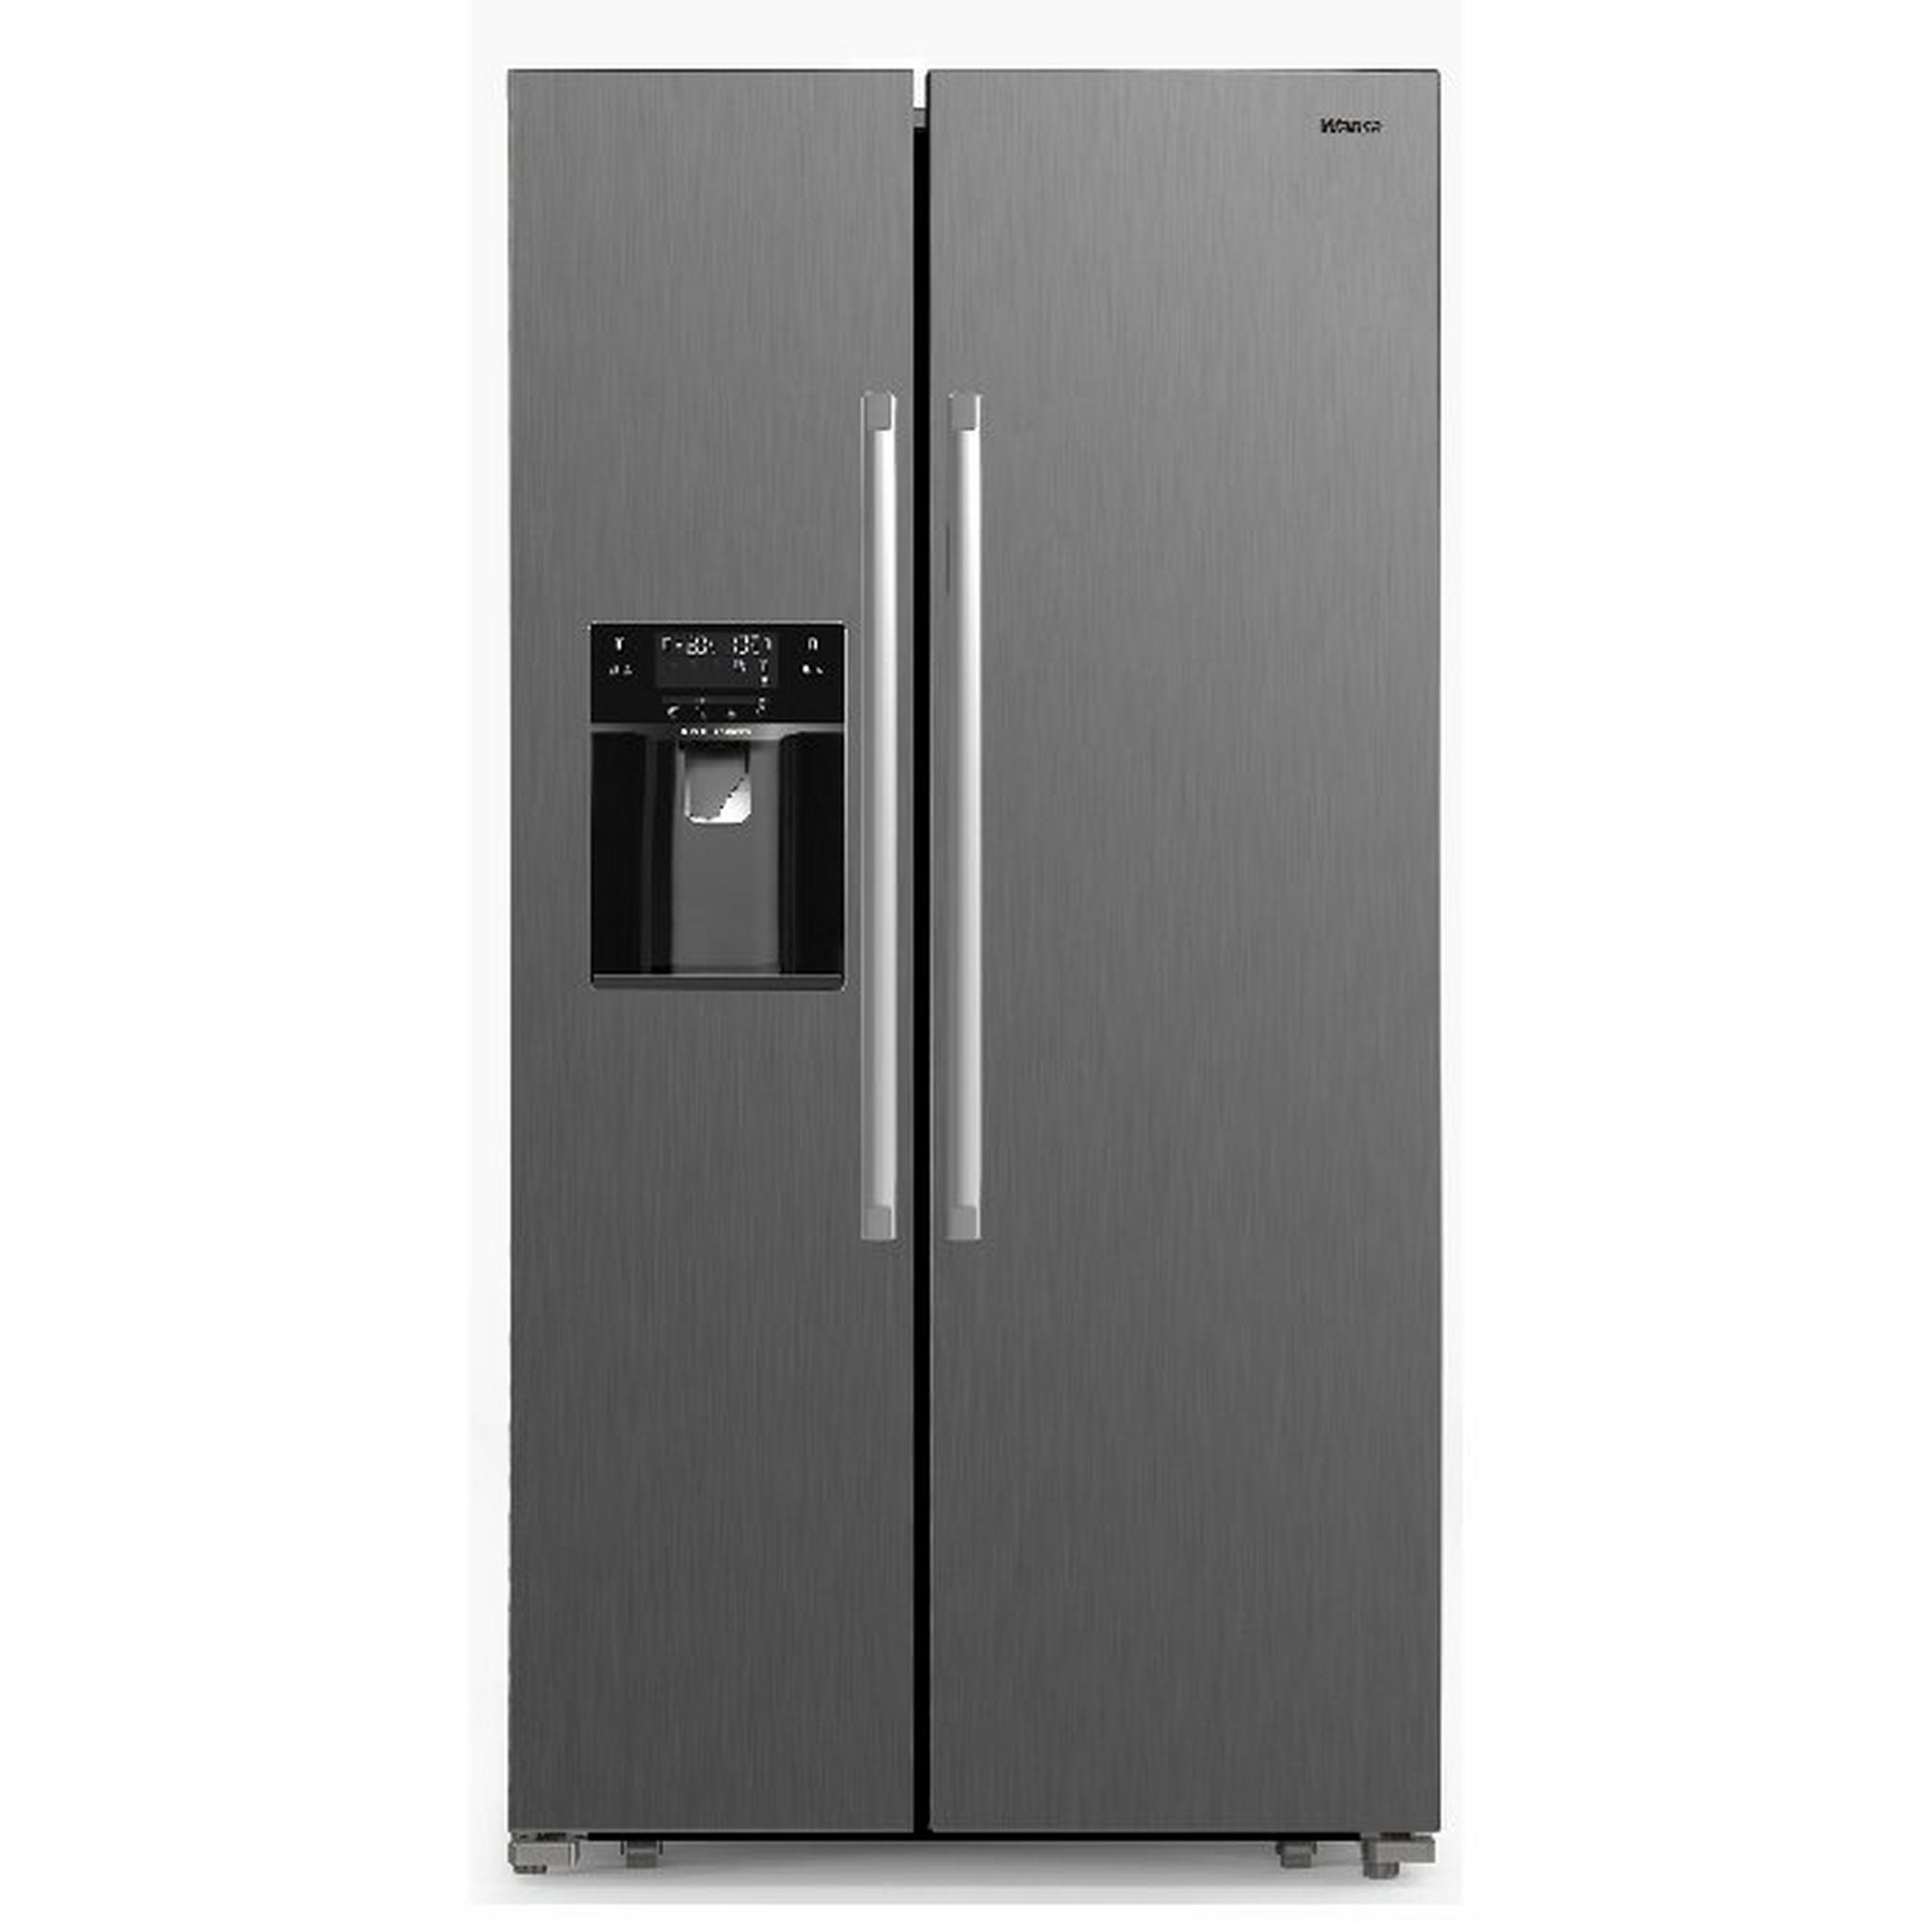 Wansa 20 Cft Side By Side Refrigerator and Freezer Stainless Steel (WRSG-563-NFSSC82)